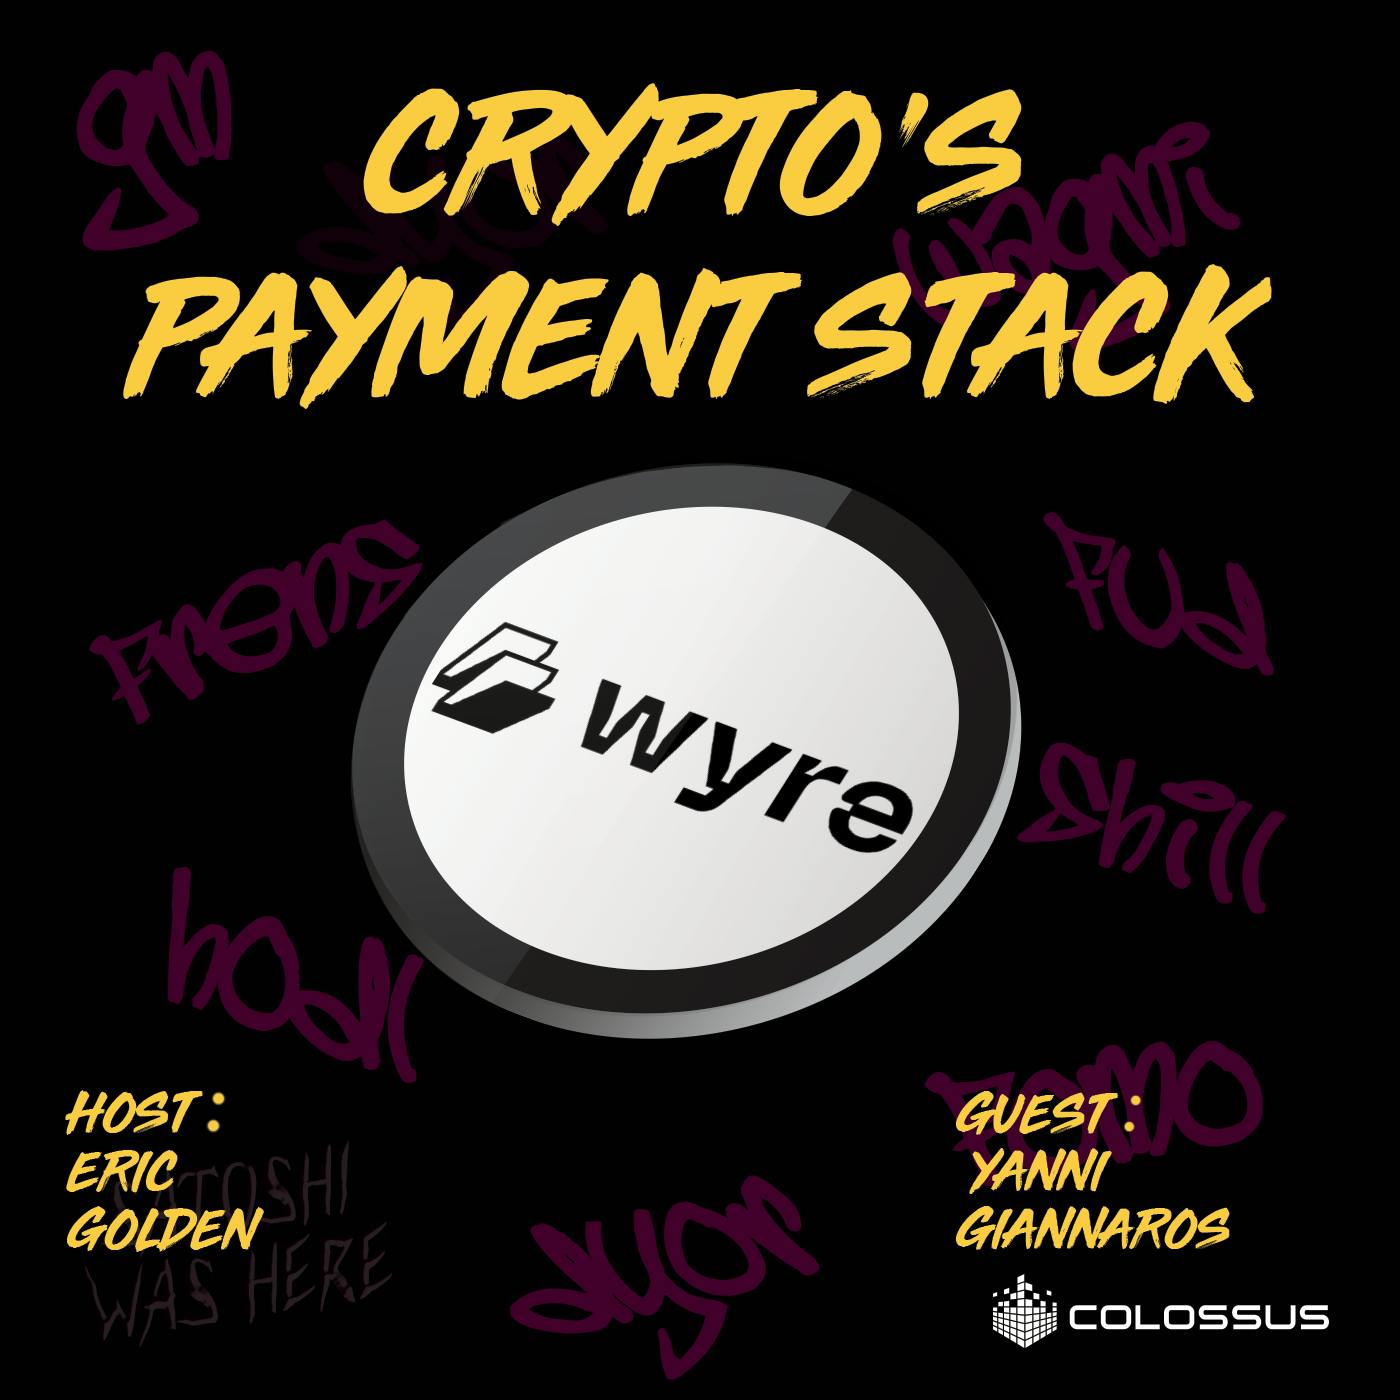 Yanni Giannaros: Crypto’s Payment Stack - [Web3 Breakdowns, EP.33]